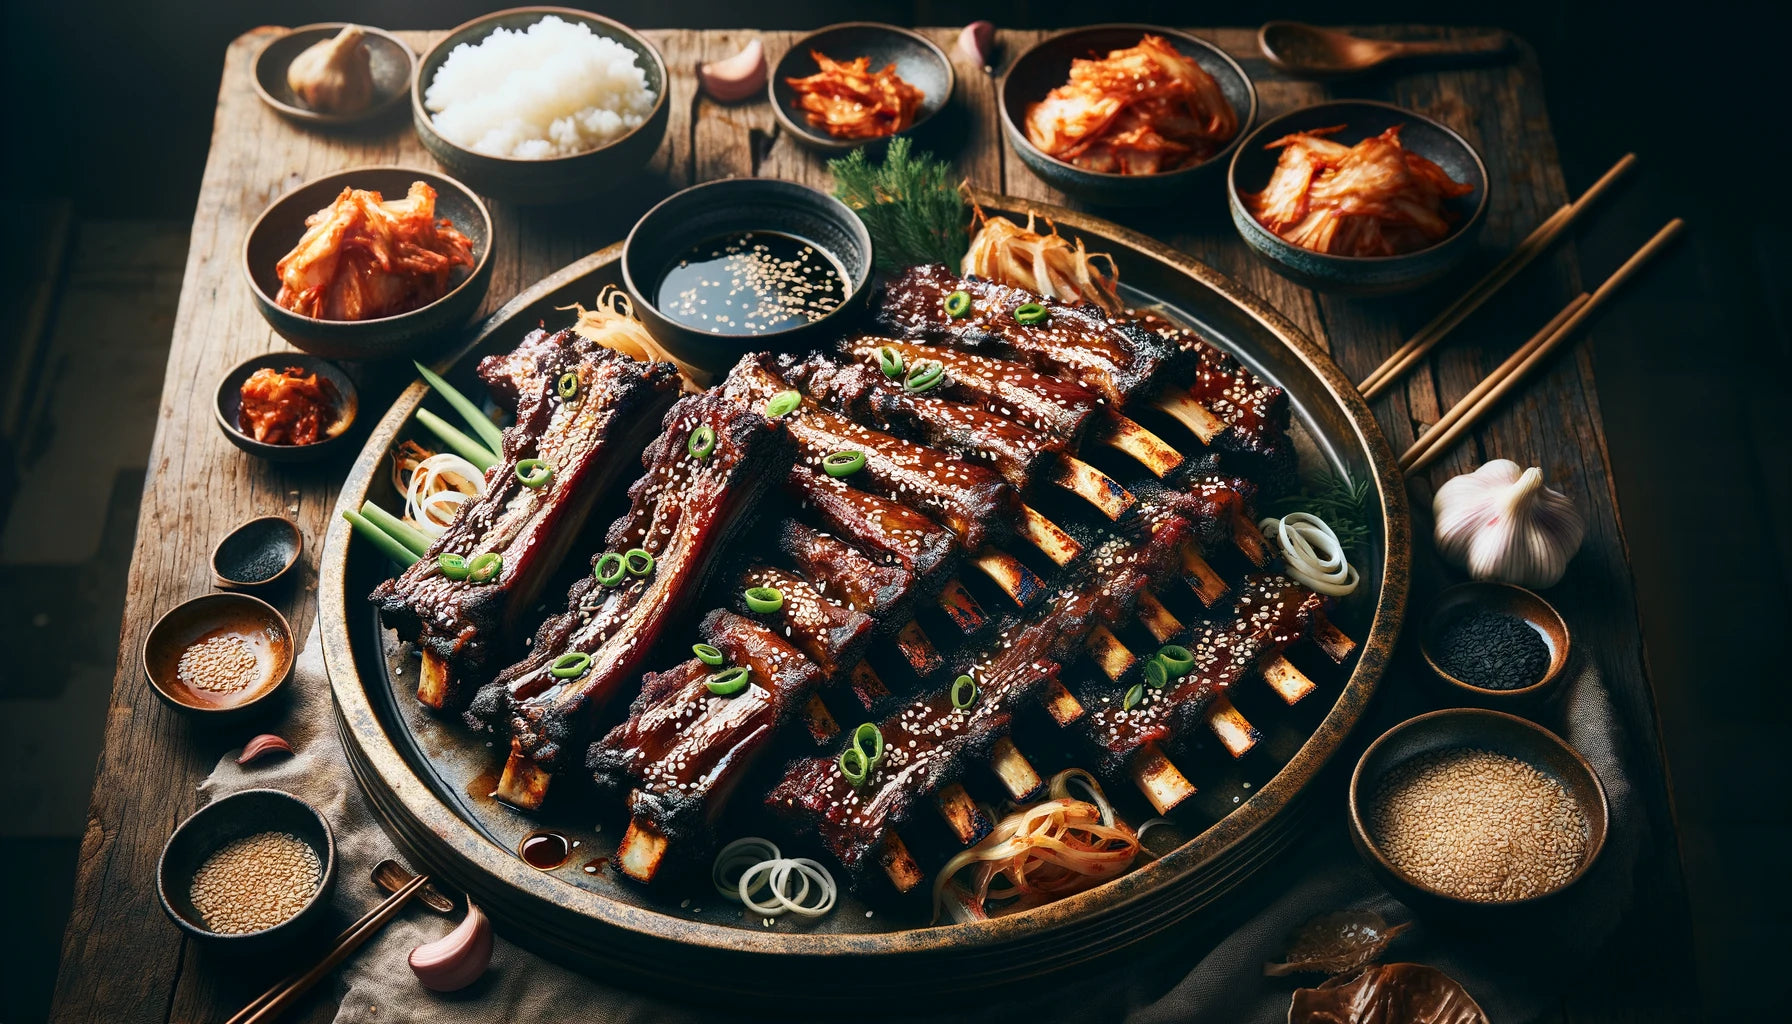 Korean short ribs, marinated and grilled to perfection